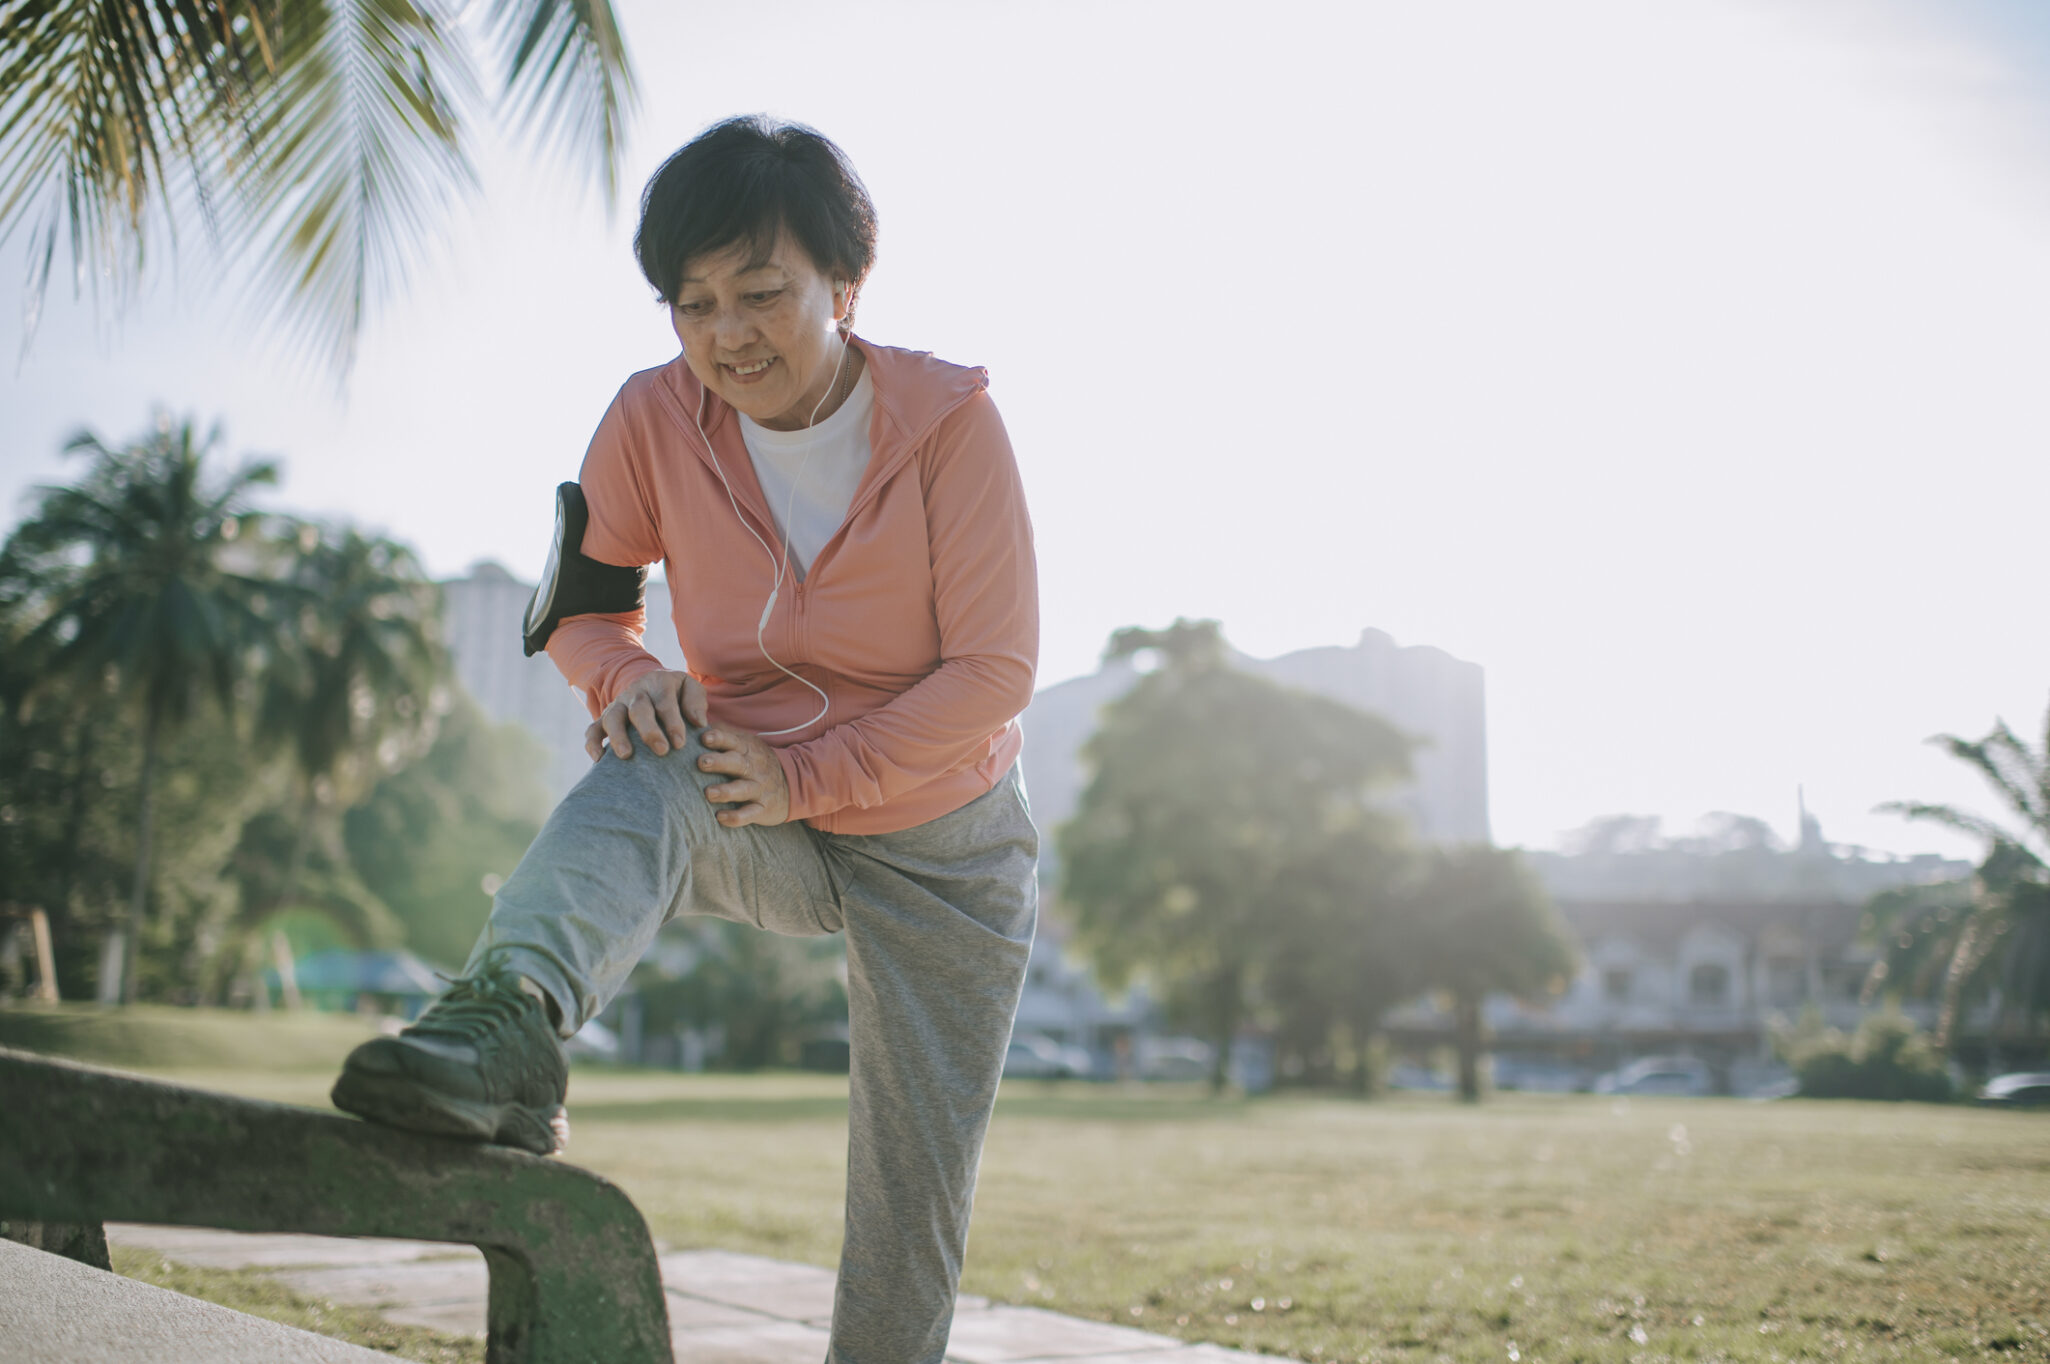 A senior woman places her foot up on a park bench to stretch out before exercising